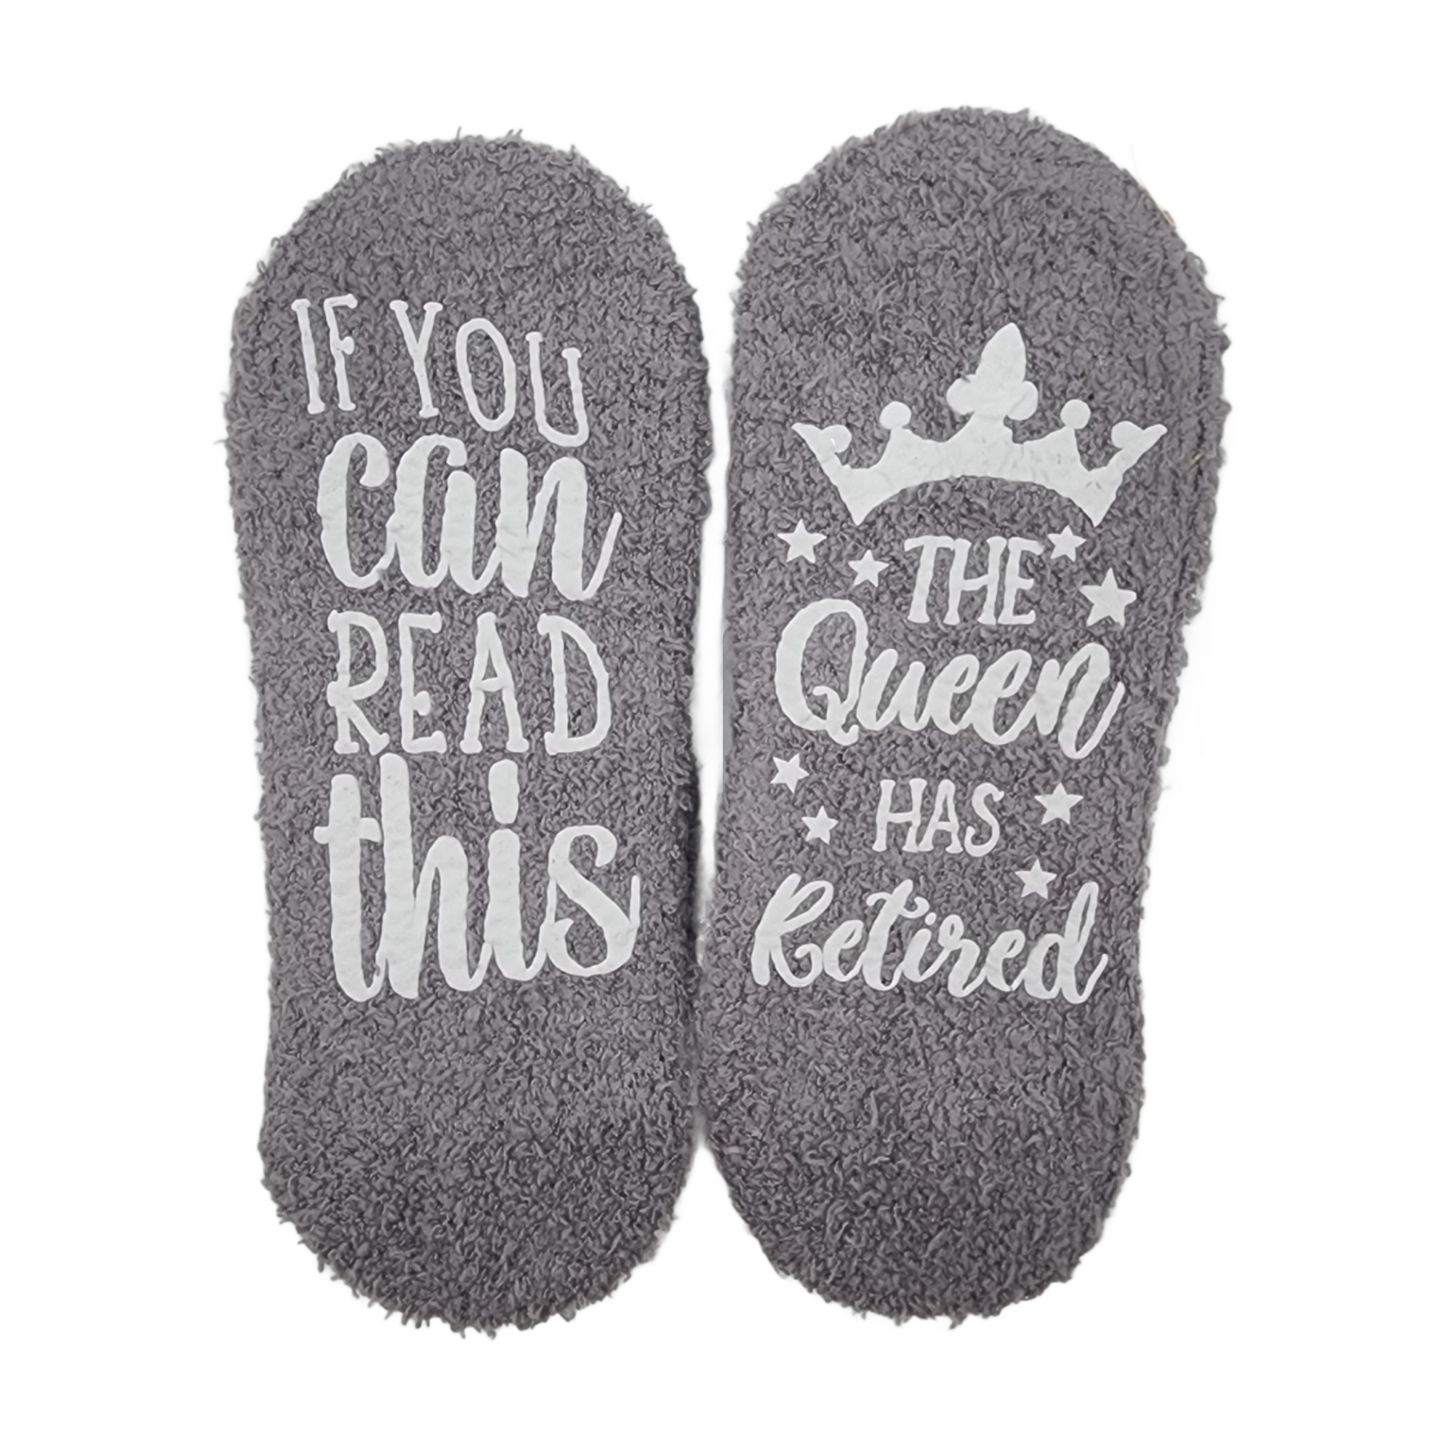 2 pair Fuzzy Socks, Puffy Design, If You Can Read This, The Queen Has Retired, Grey/White